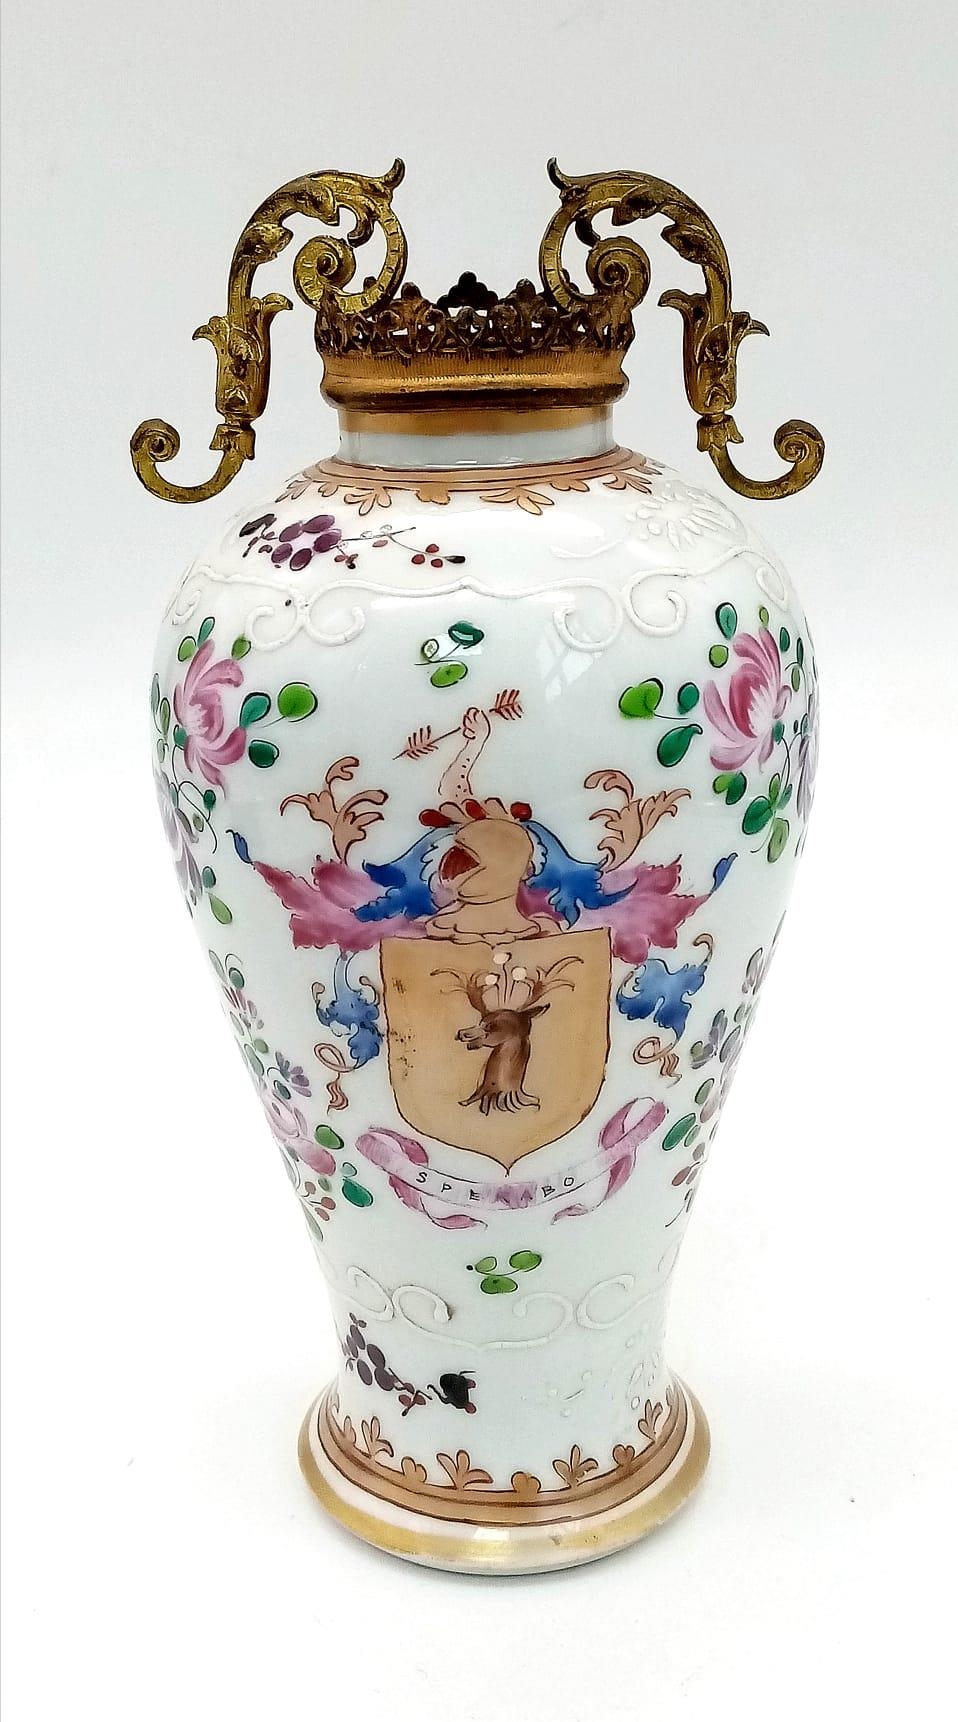 An Antique Porcelain Chinese Vase with Hand-Painted Armorial and Floral Decoration. Marks on base.